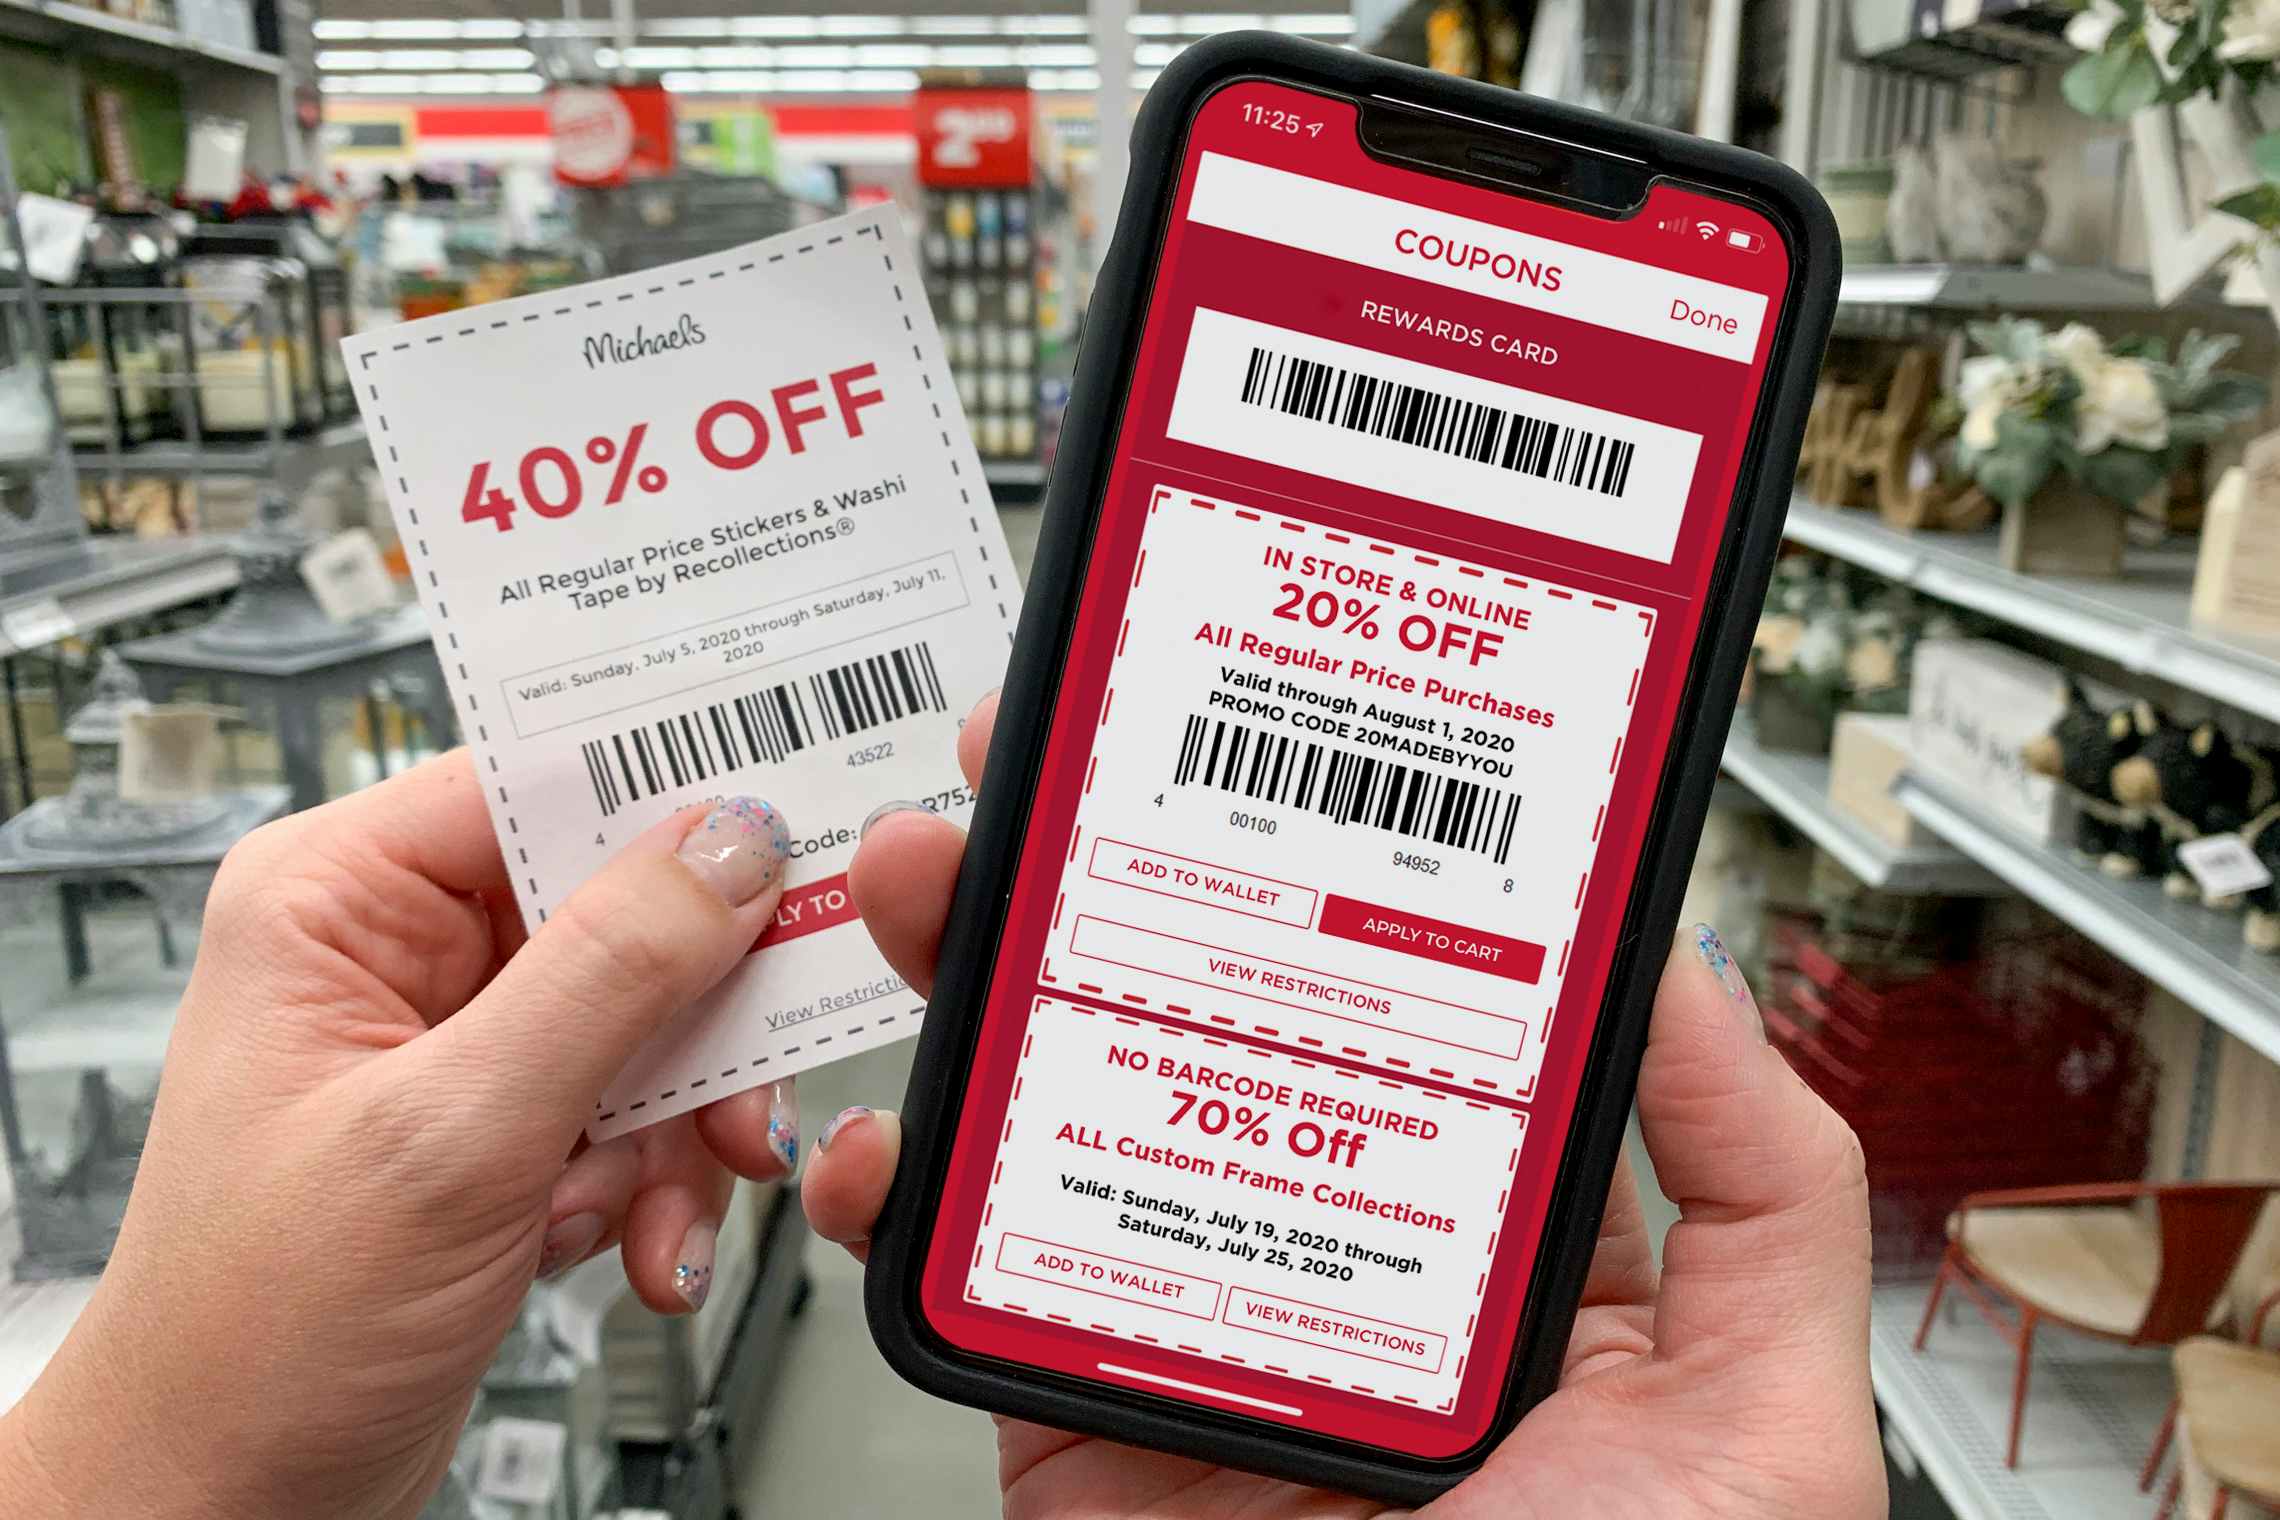 A printed 40% off Michaels coupon held next to a 20% off coupon on the app.